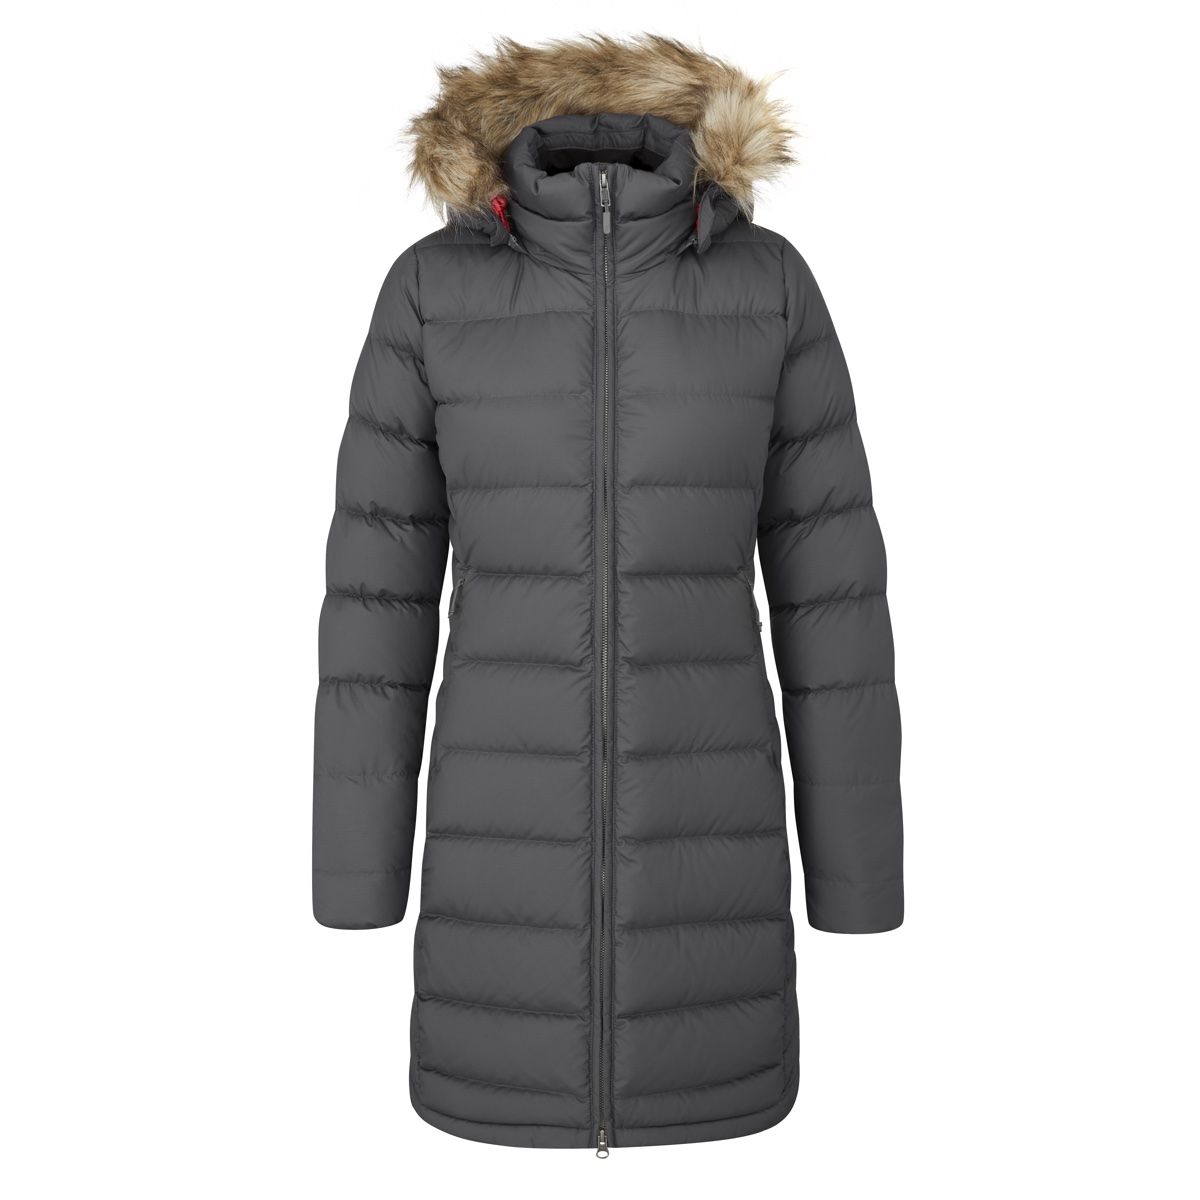 Rab Deep Cover Parka Insulated Women's Jacket | Graphene